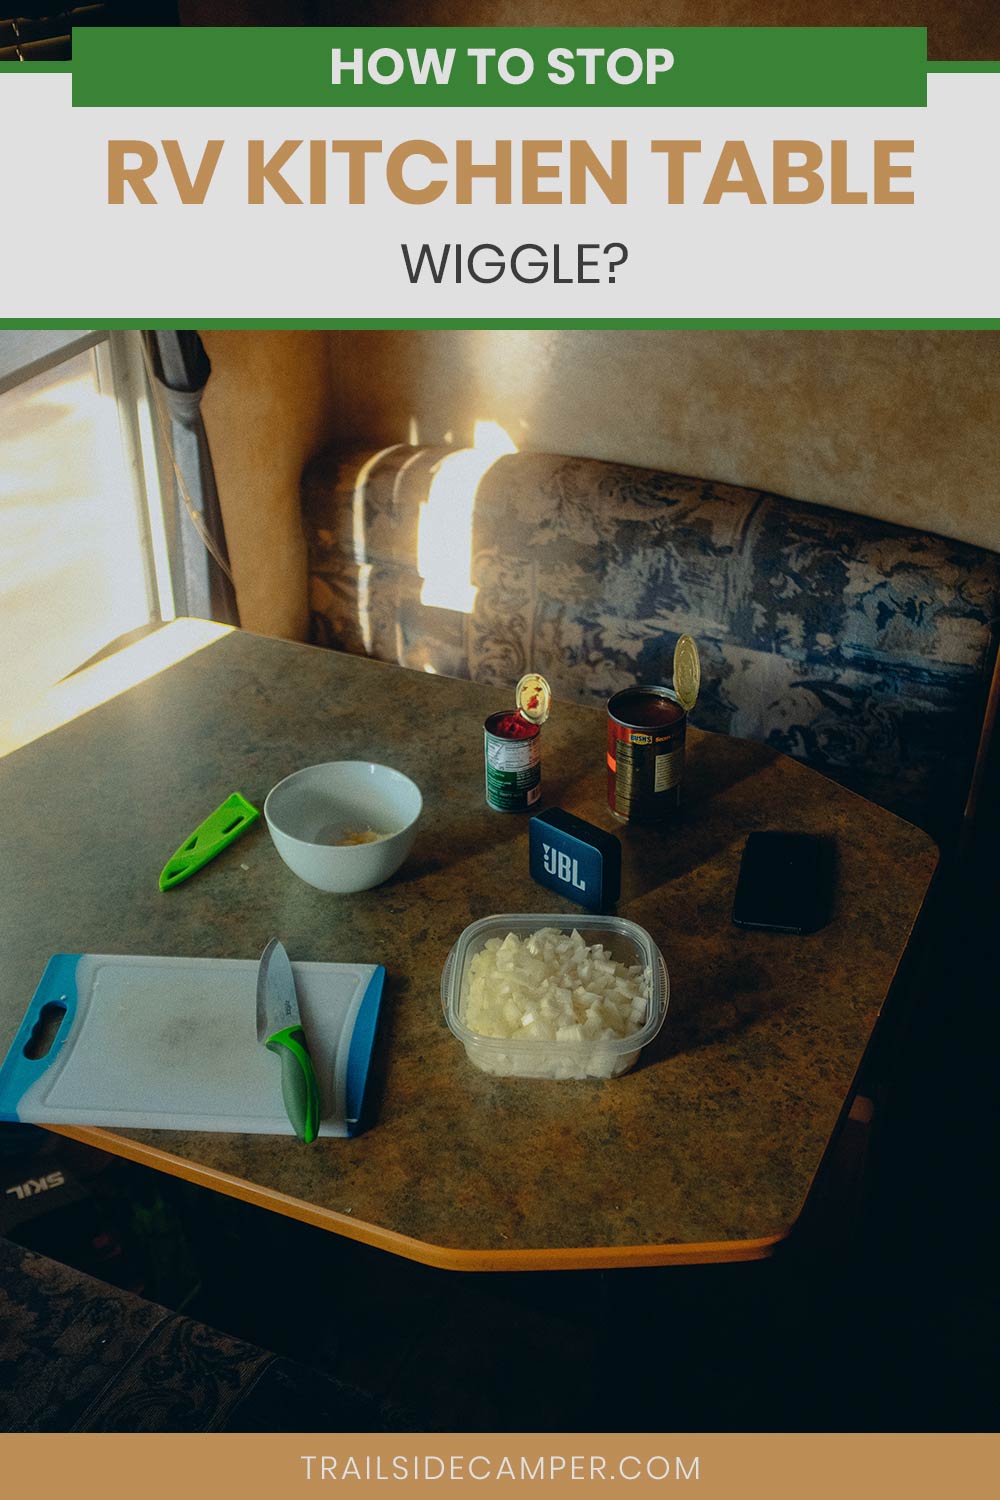 How to Stop RV Kitchen Table Wiggle?